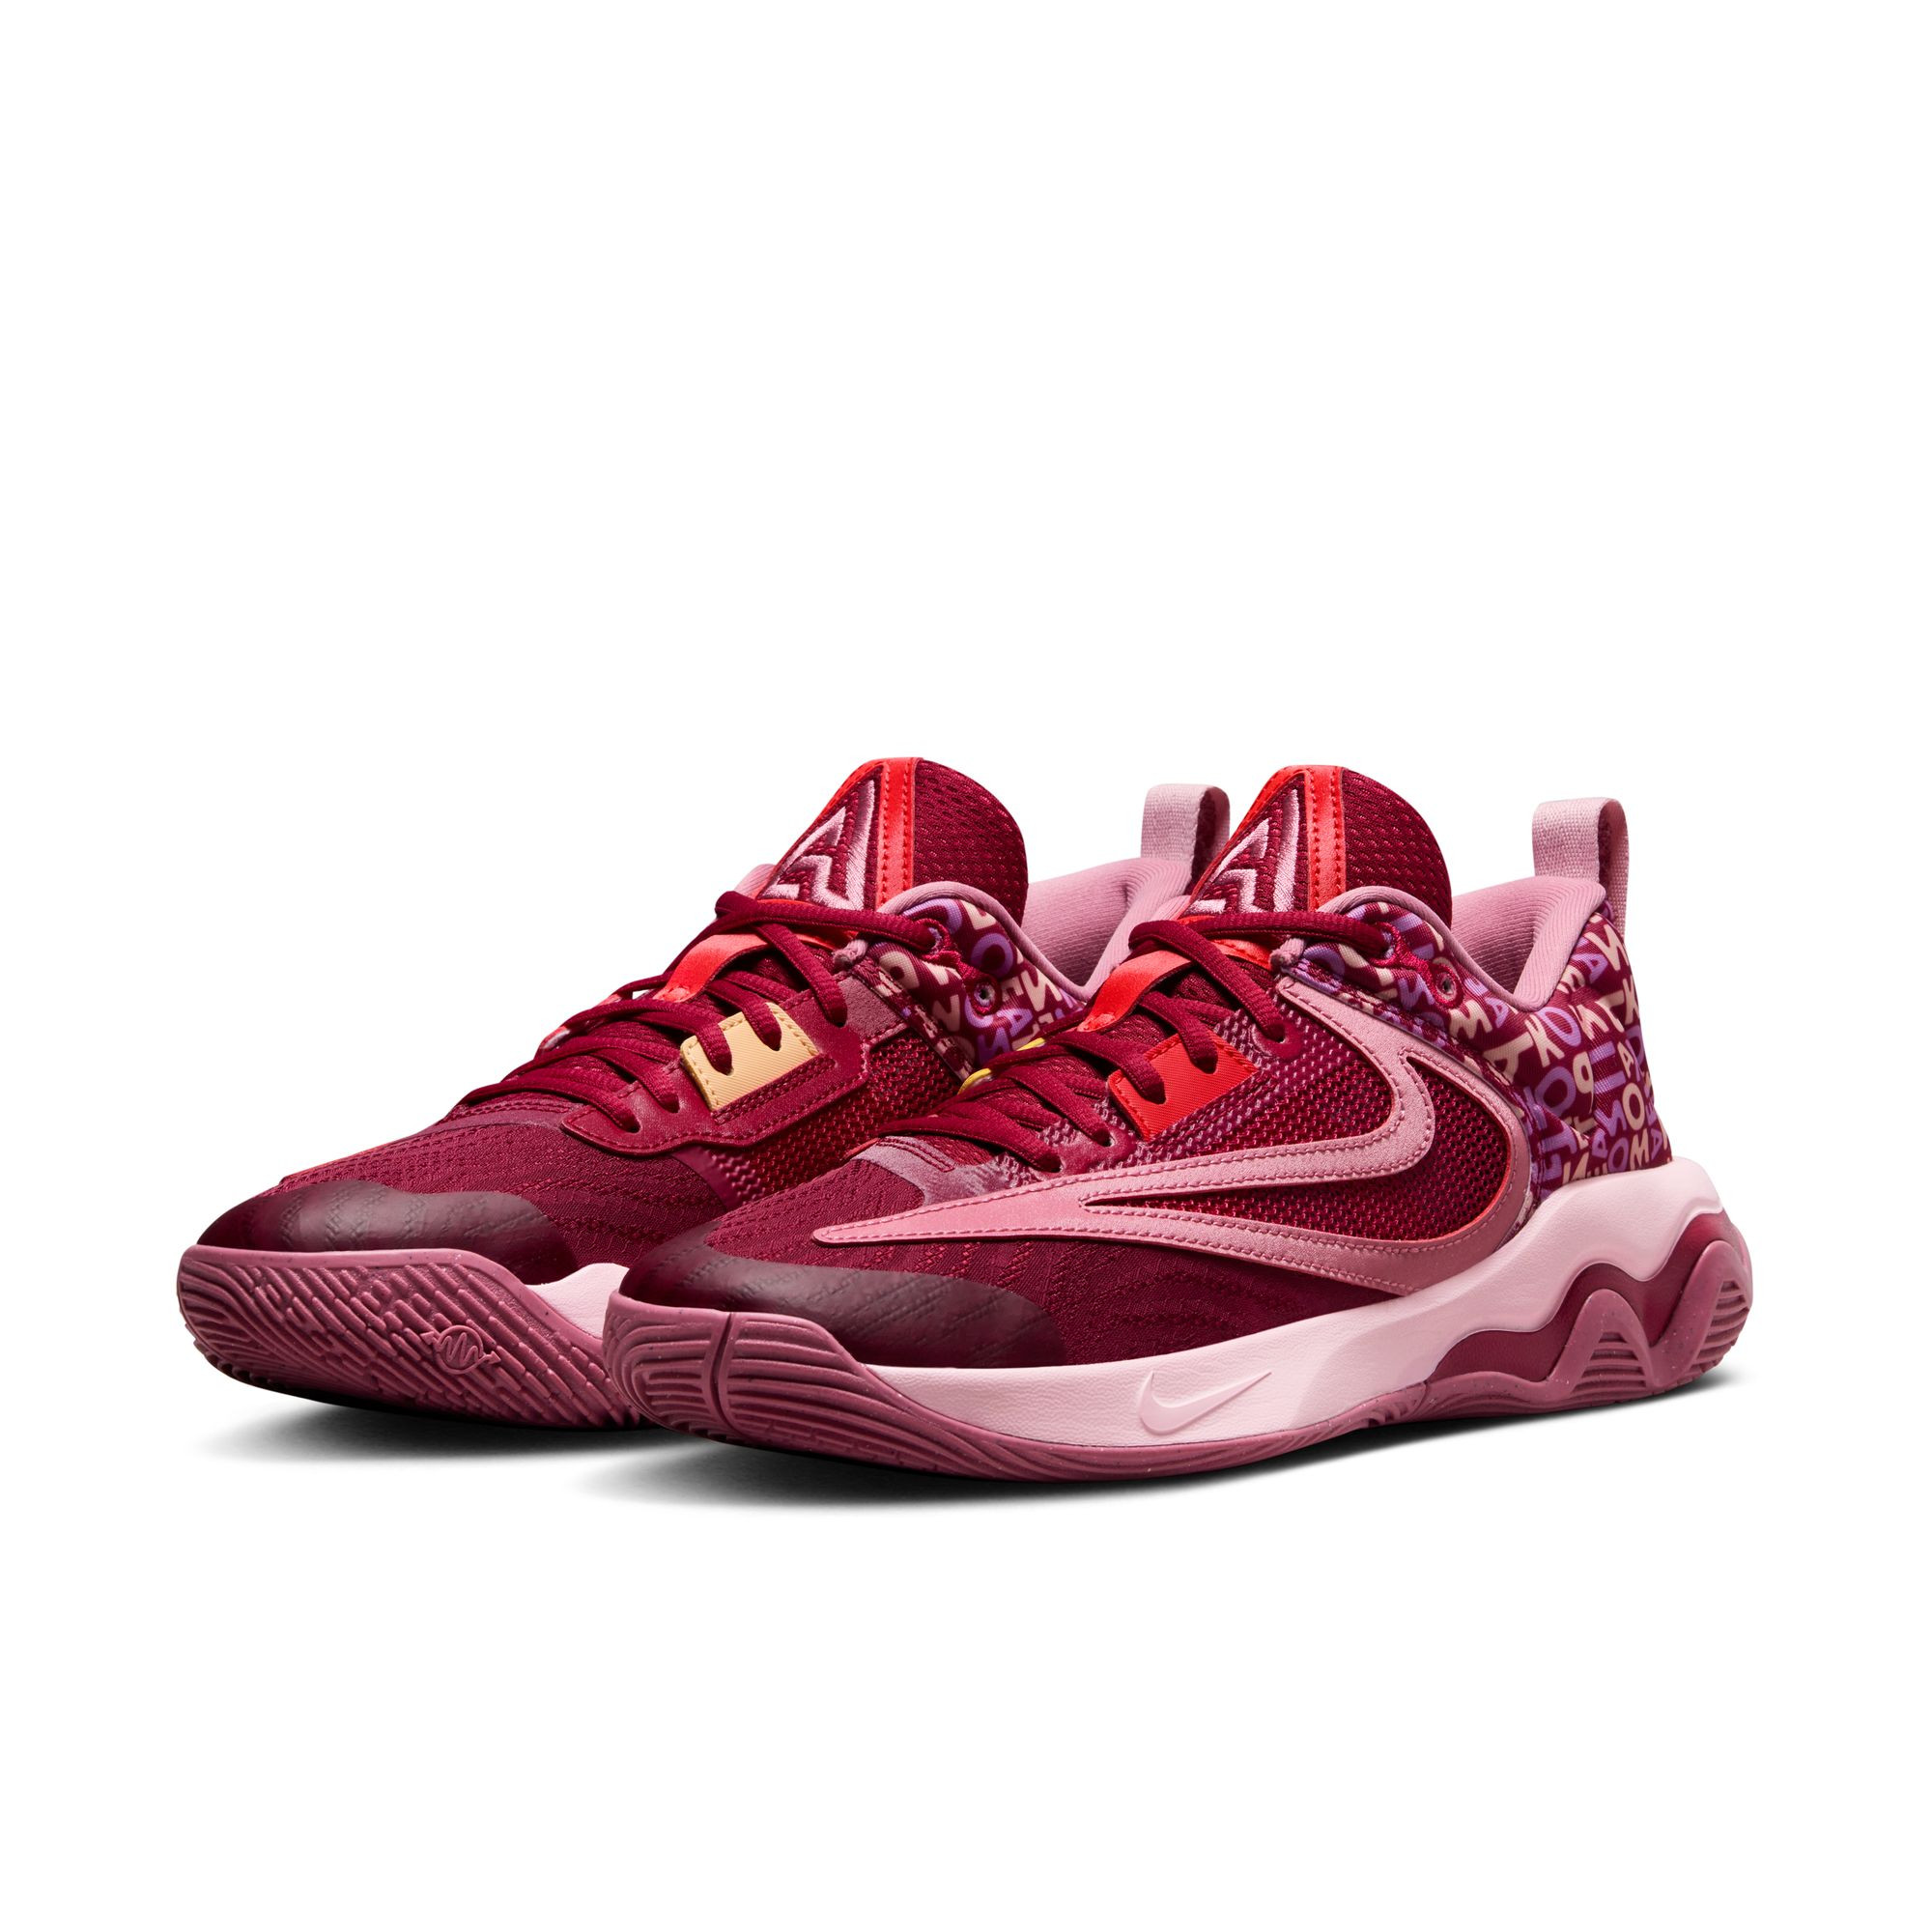 Chaussures Nike Giannis Immortality 3 - Noble Red/Ice Peach-Desert Berry - DZ7533-600